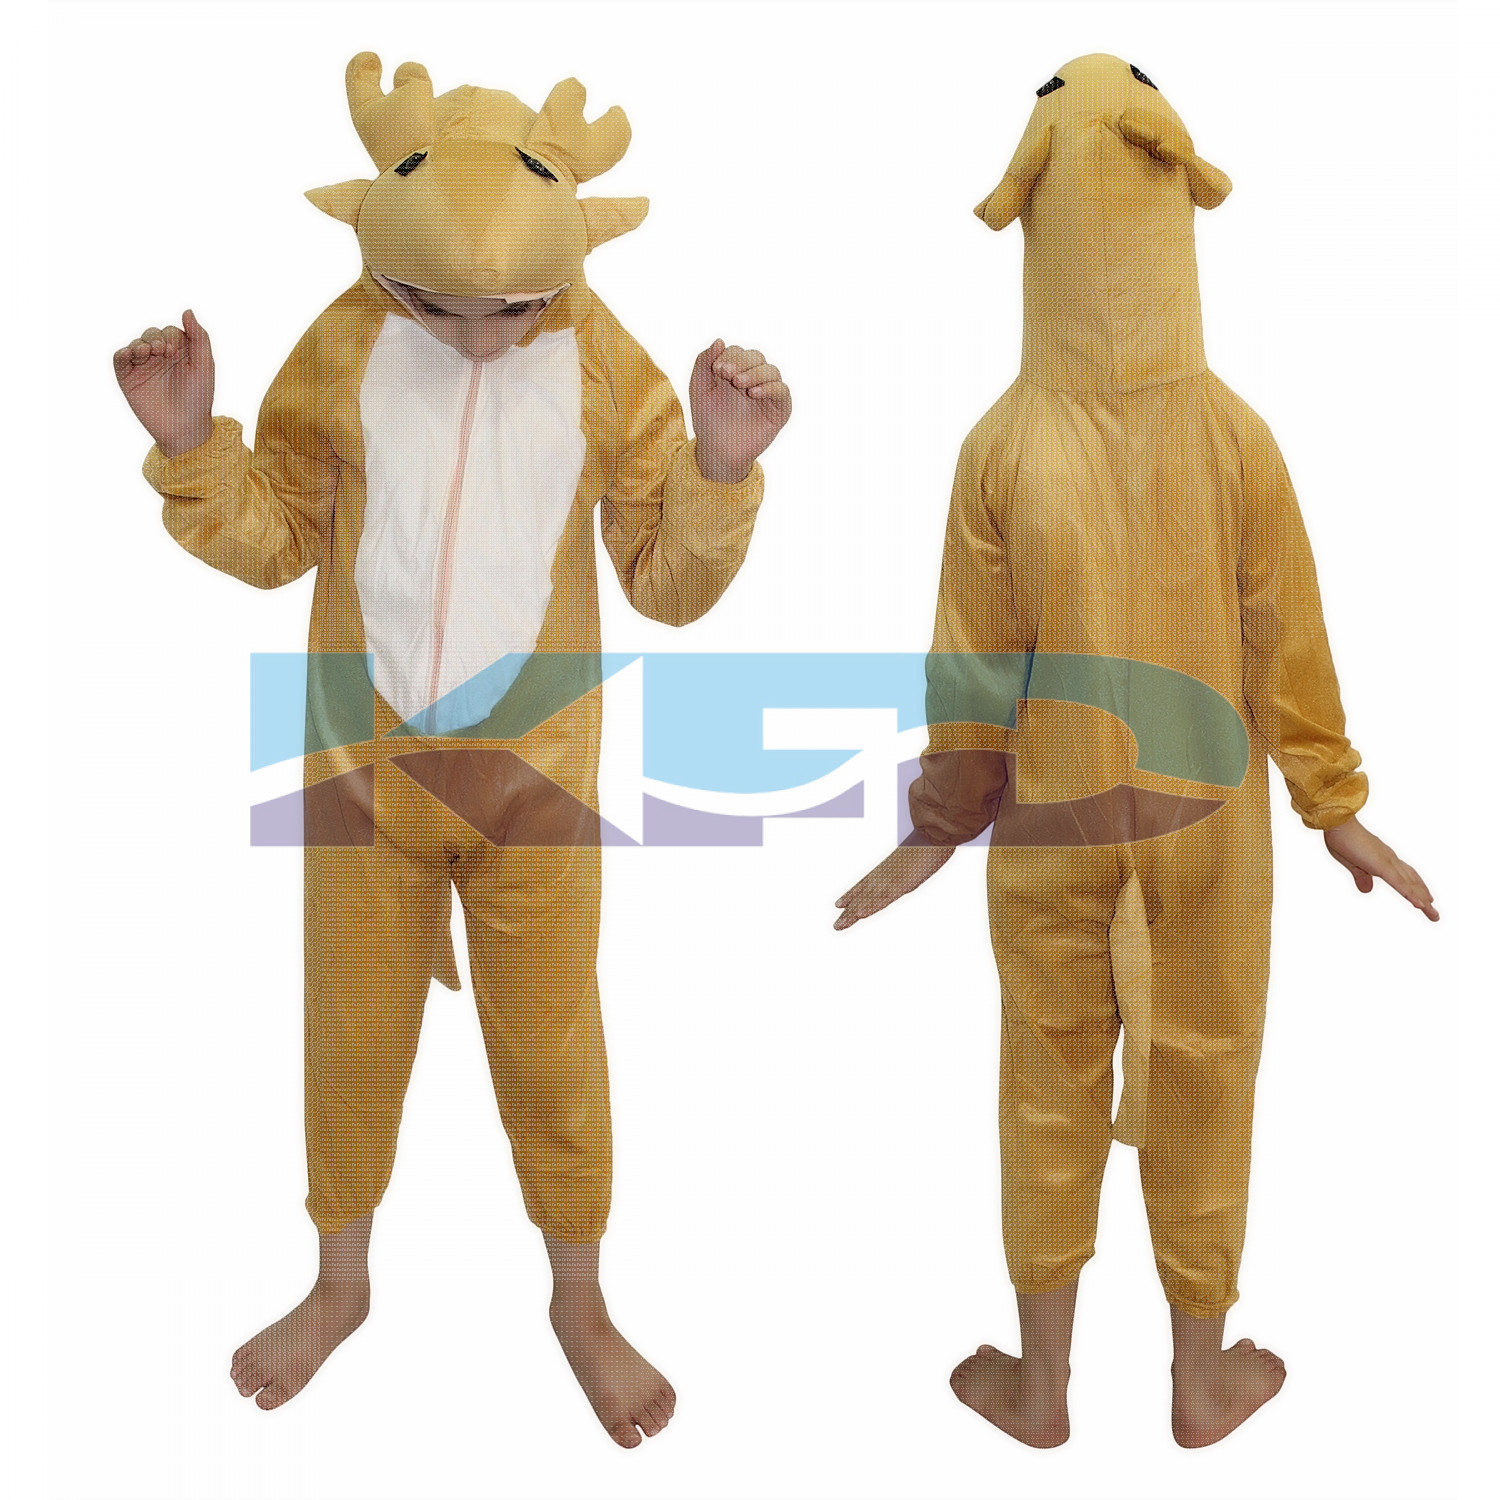 Deer fancy dress for kids,Wild Animal Costume for School Annual function/Theme Party/Competition/Stage Shows  Dress